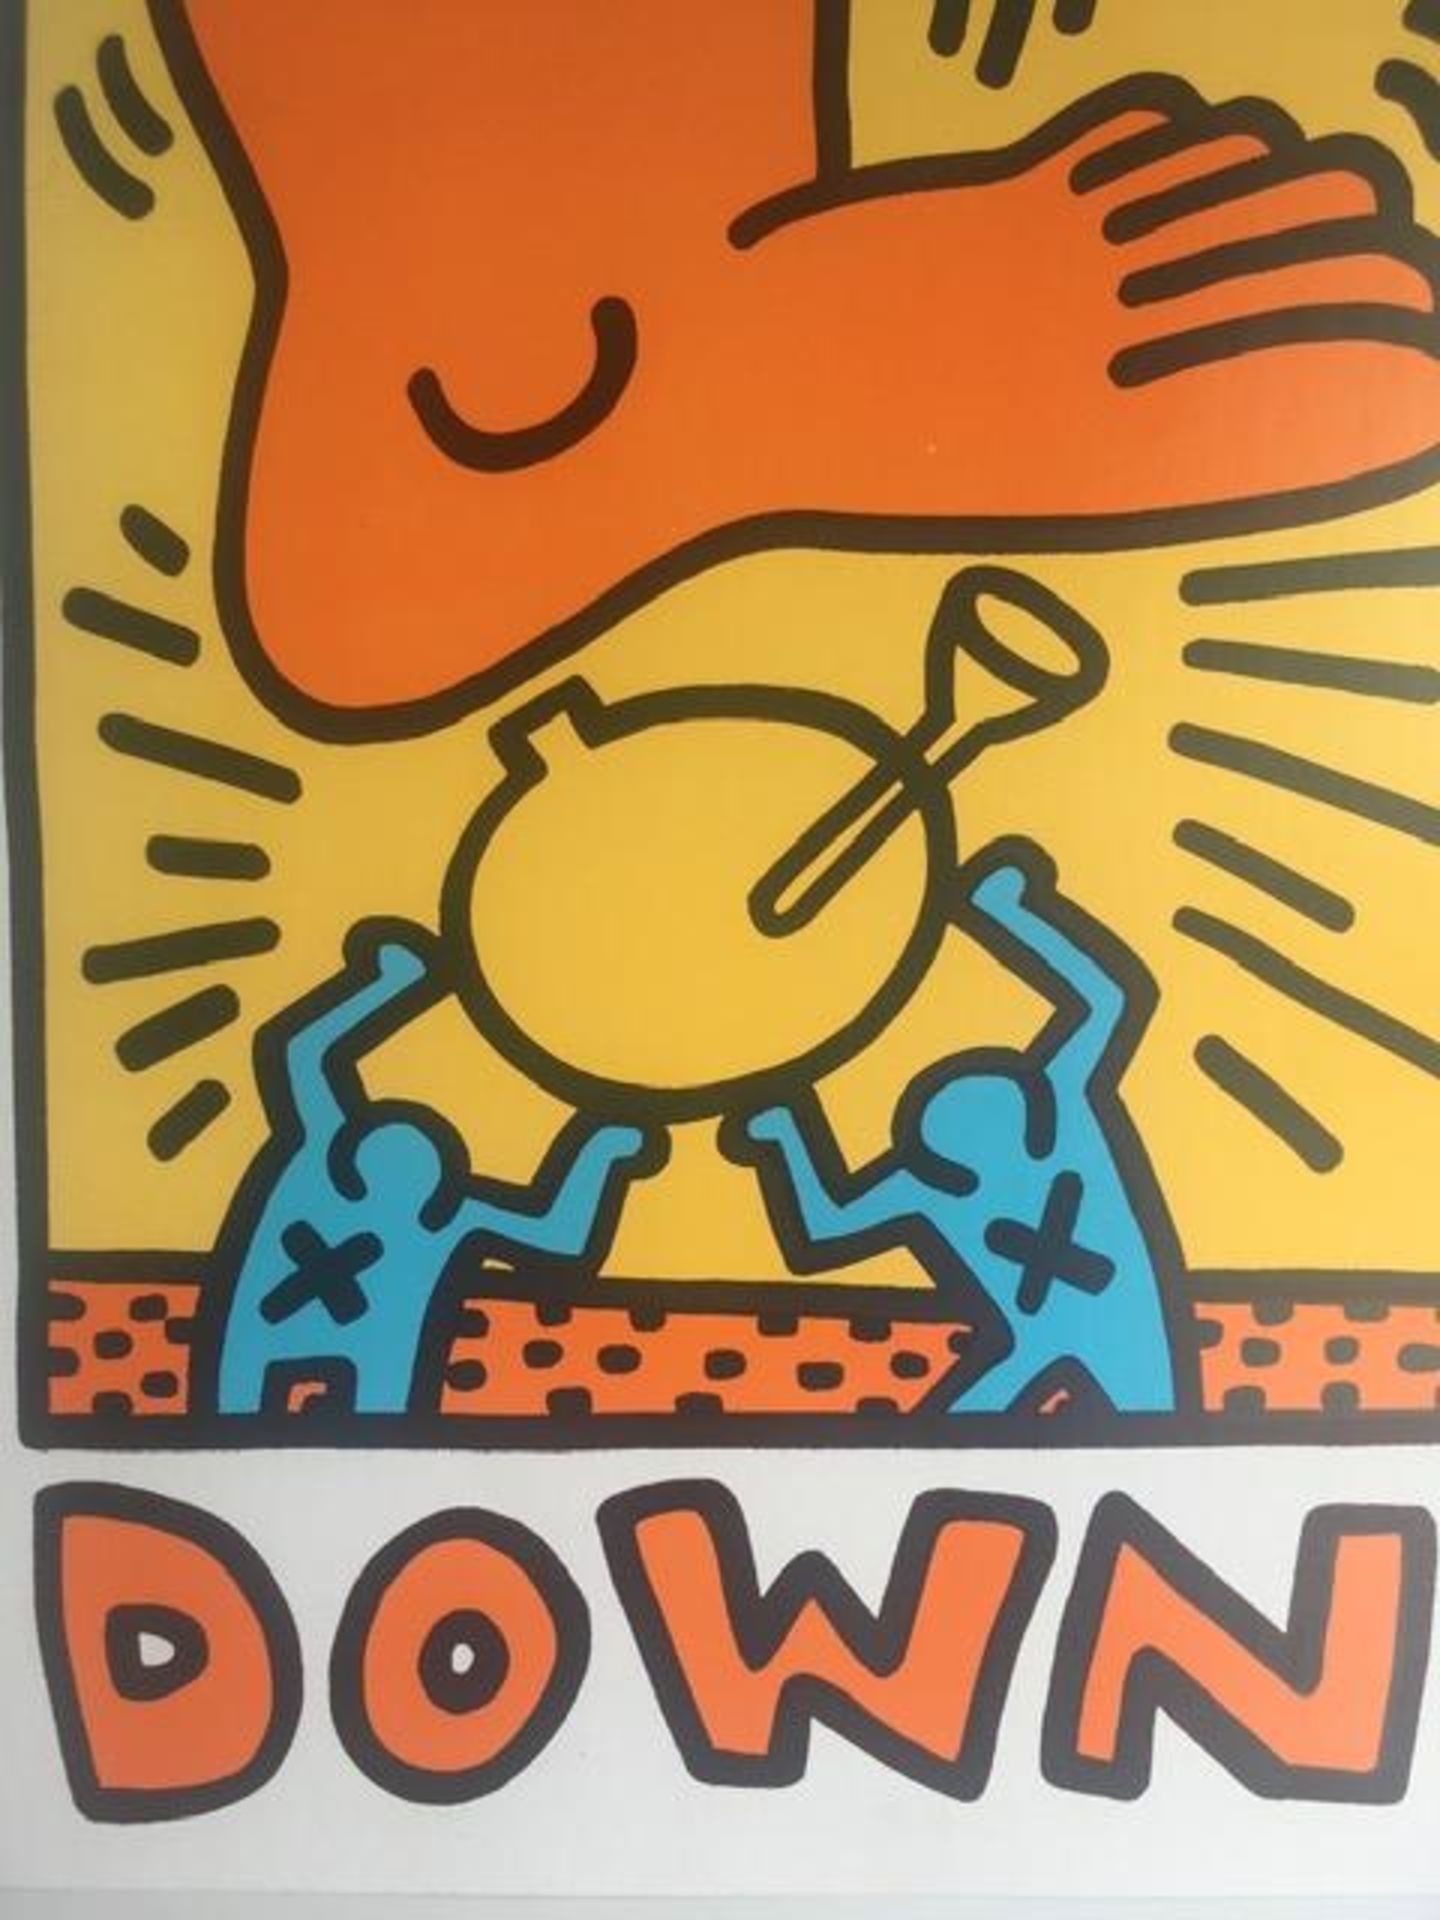 Keith Haring (1958-1990) Pop Shop, Crack Down, A Vintage Poster 1986 On Card. 43 x 56 cm. - Image 4 of 6